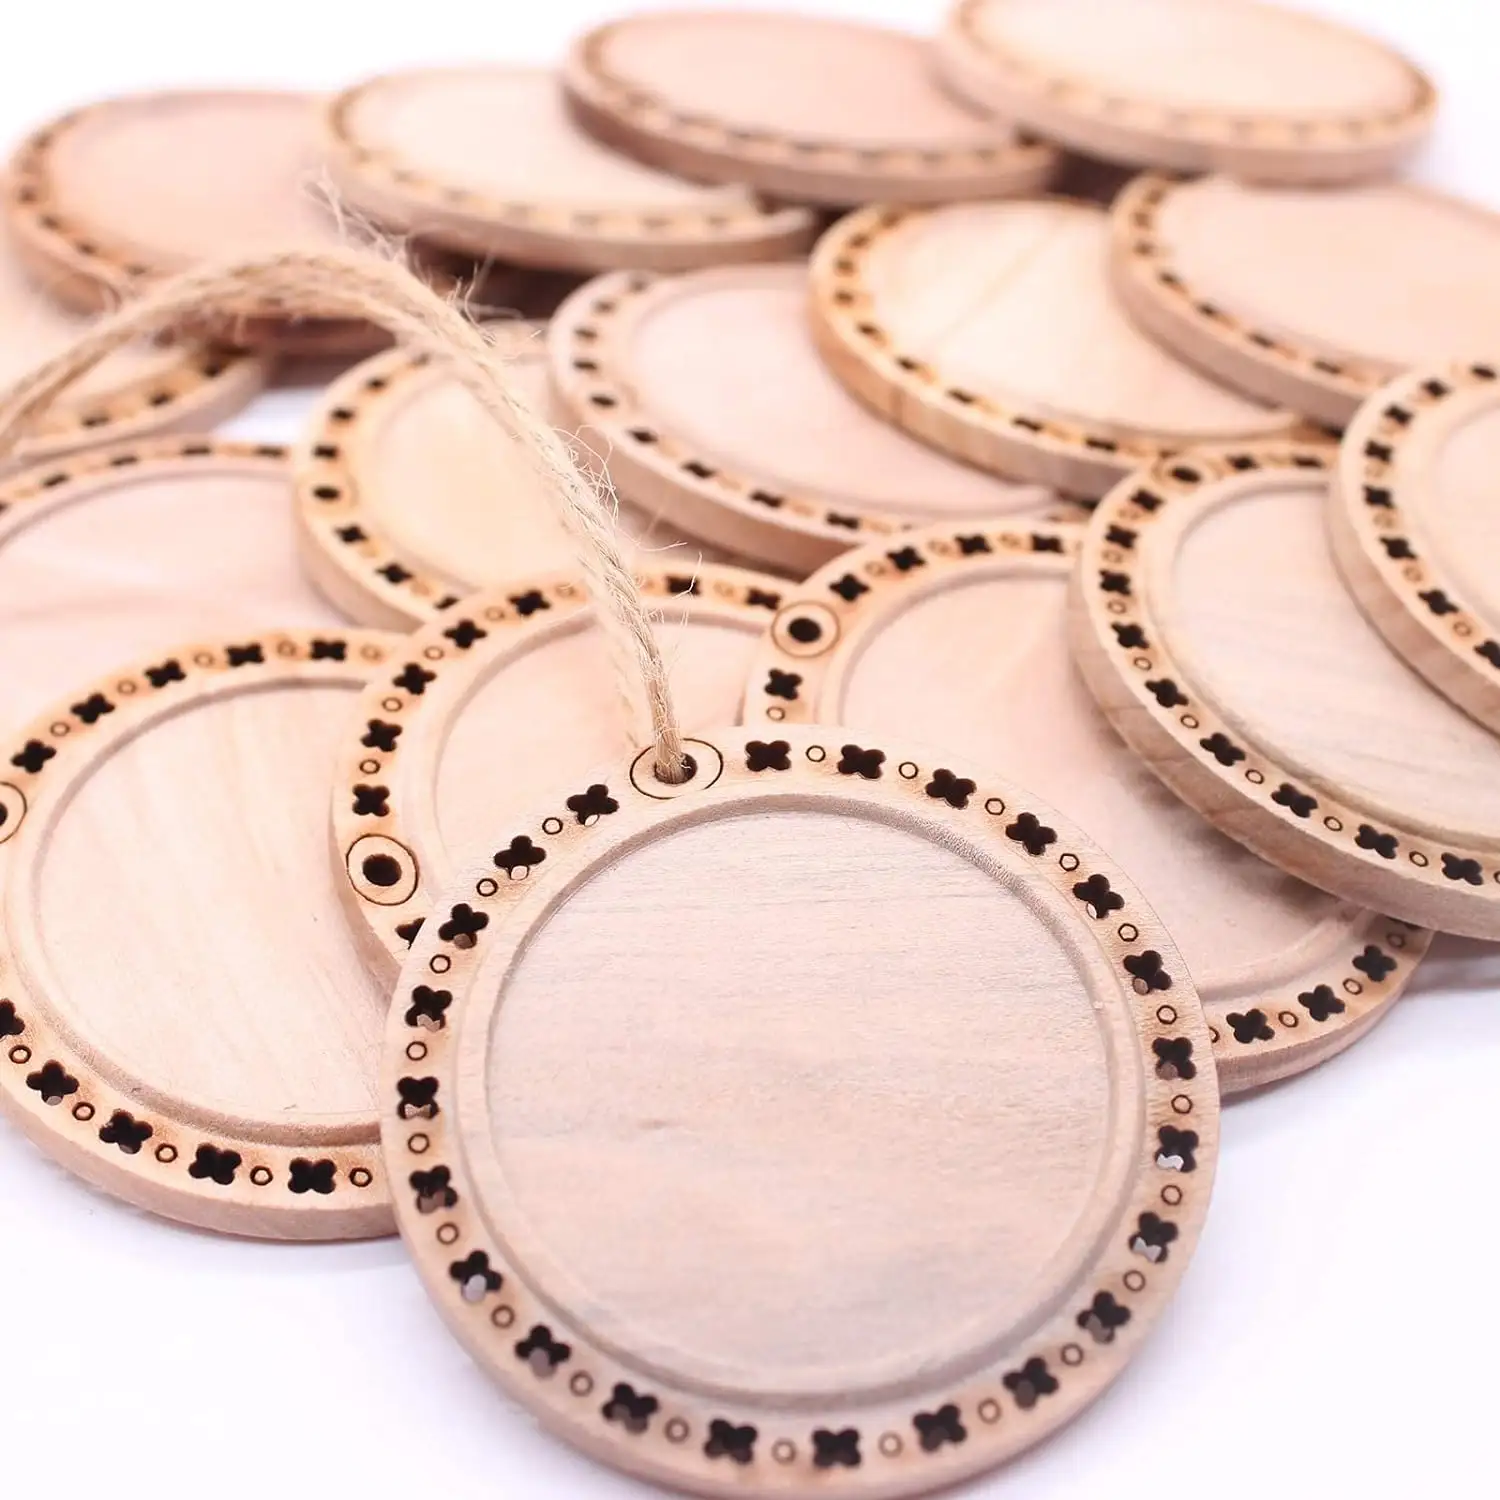 Natural Wood Slices Craft Unfinished Wood kit Predrilled with Hole Wooden Circles for DIY Crafts Wedding Decorations Christmas